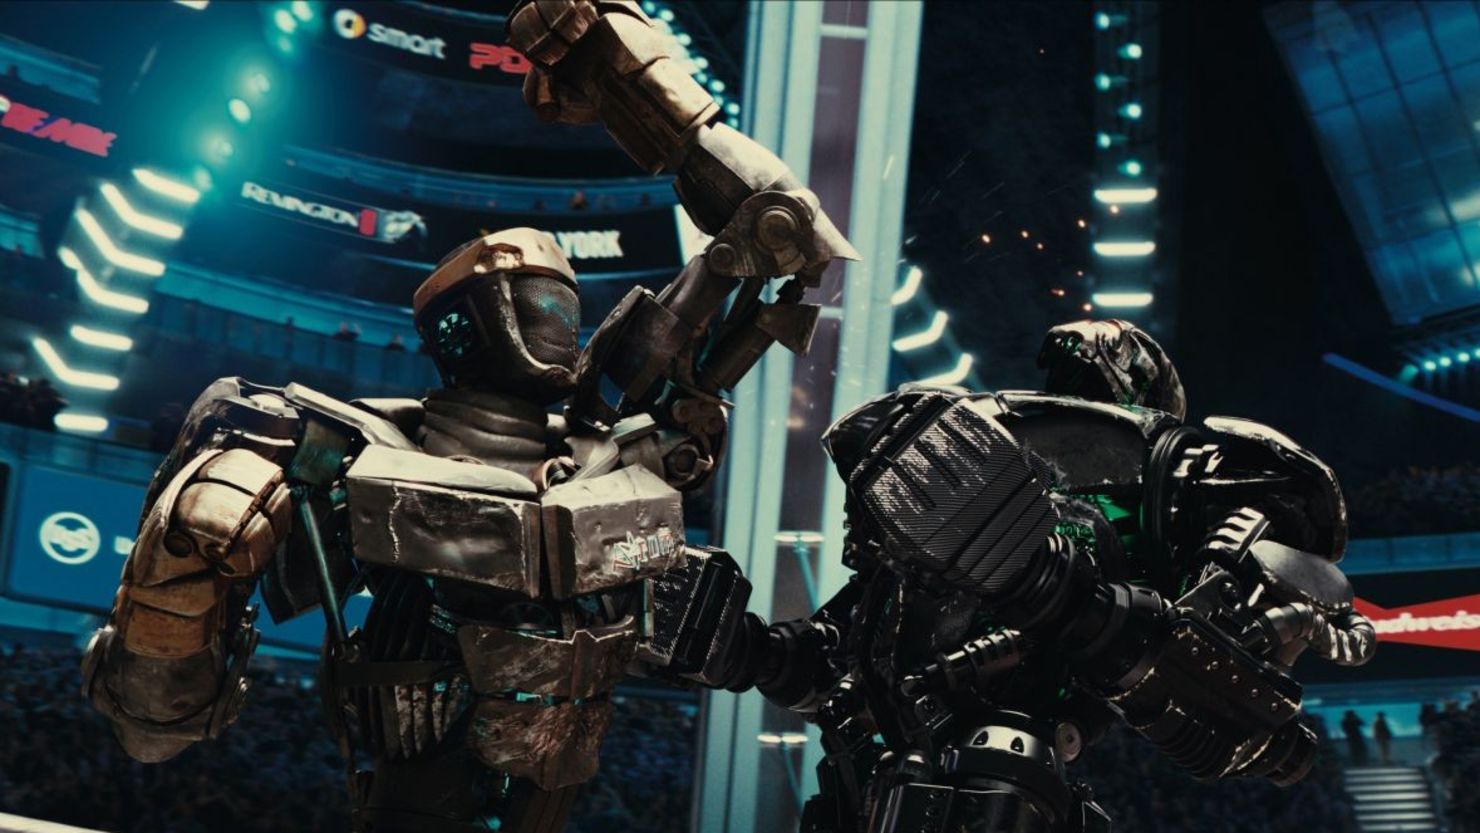 "Real Steel" punched up an estimated $16.3 million this weekend.